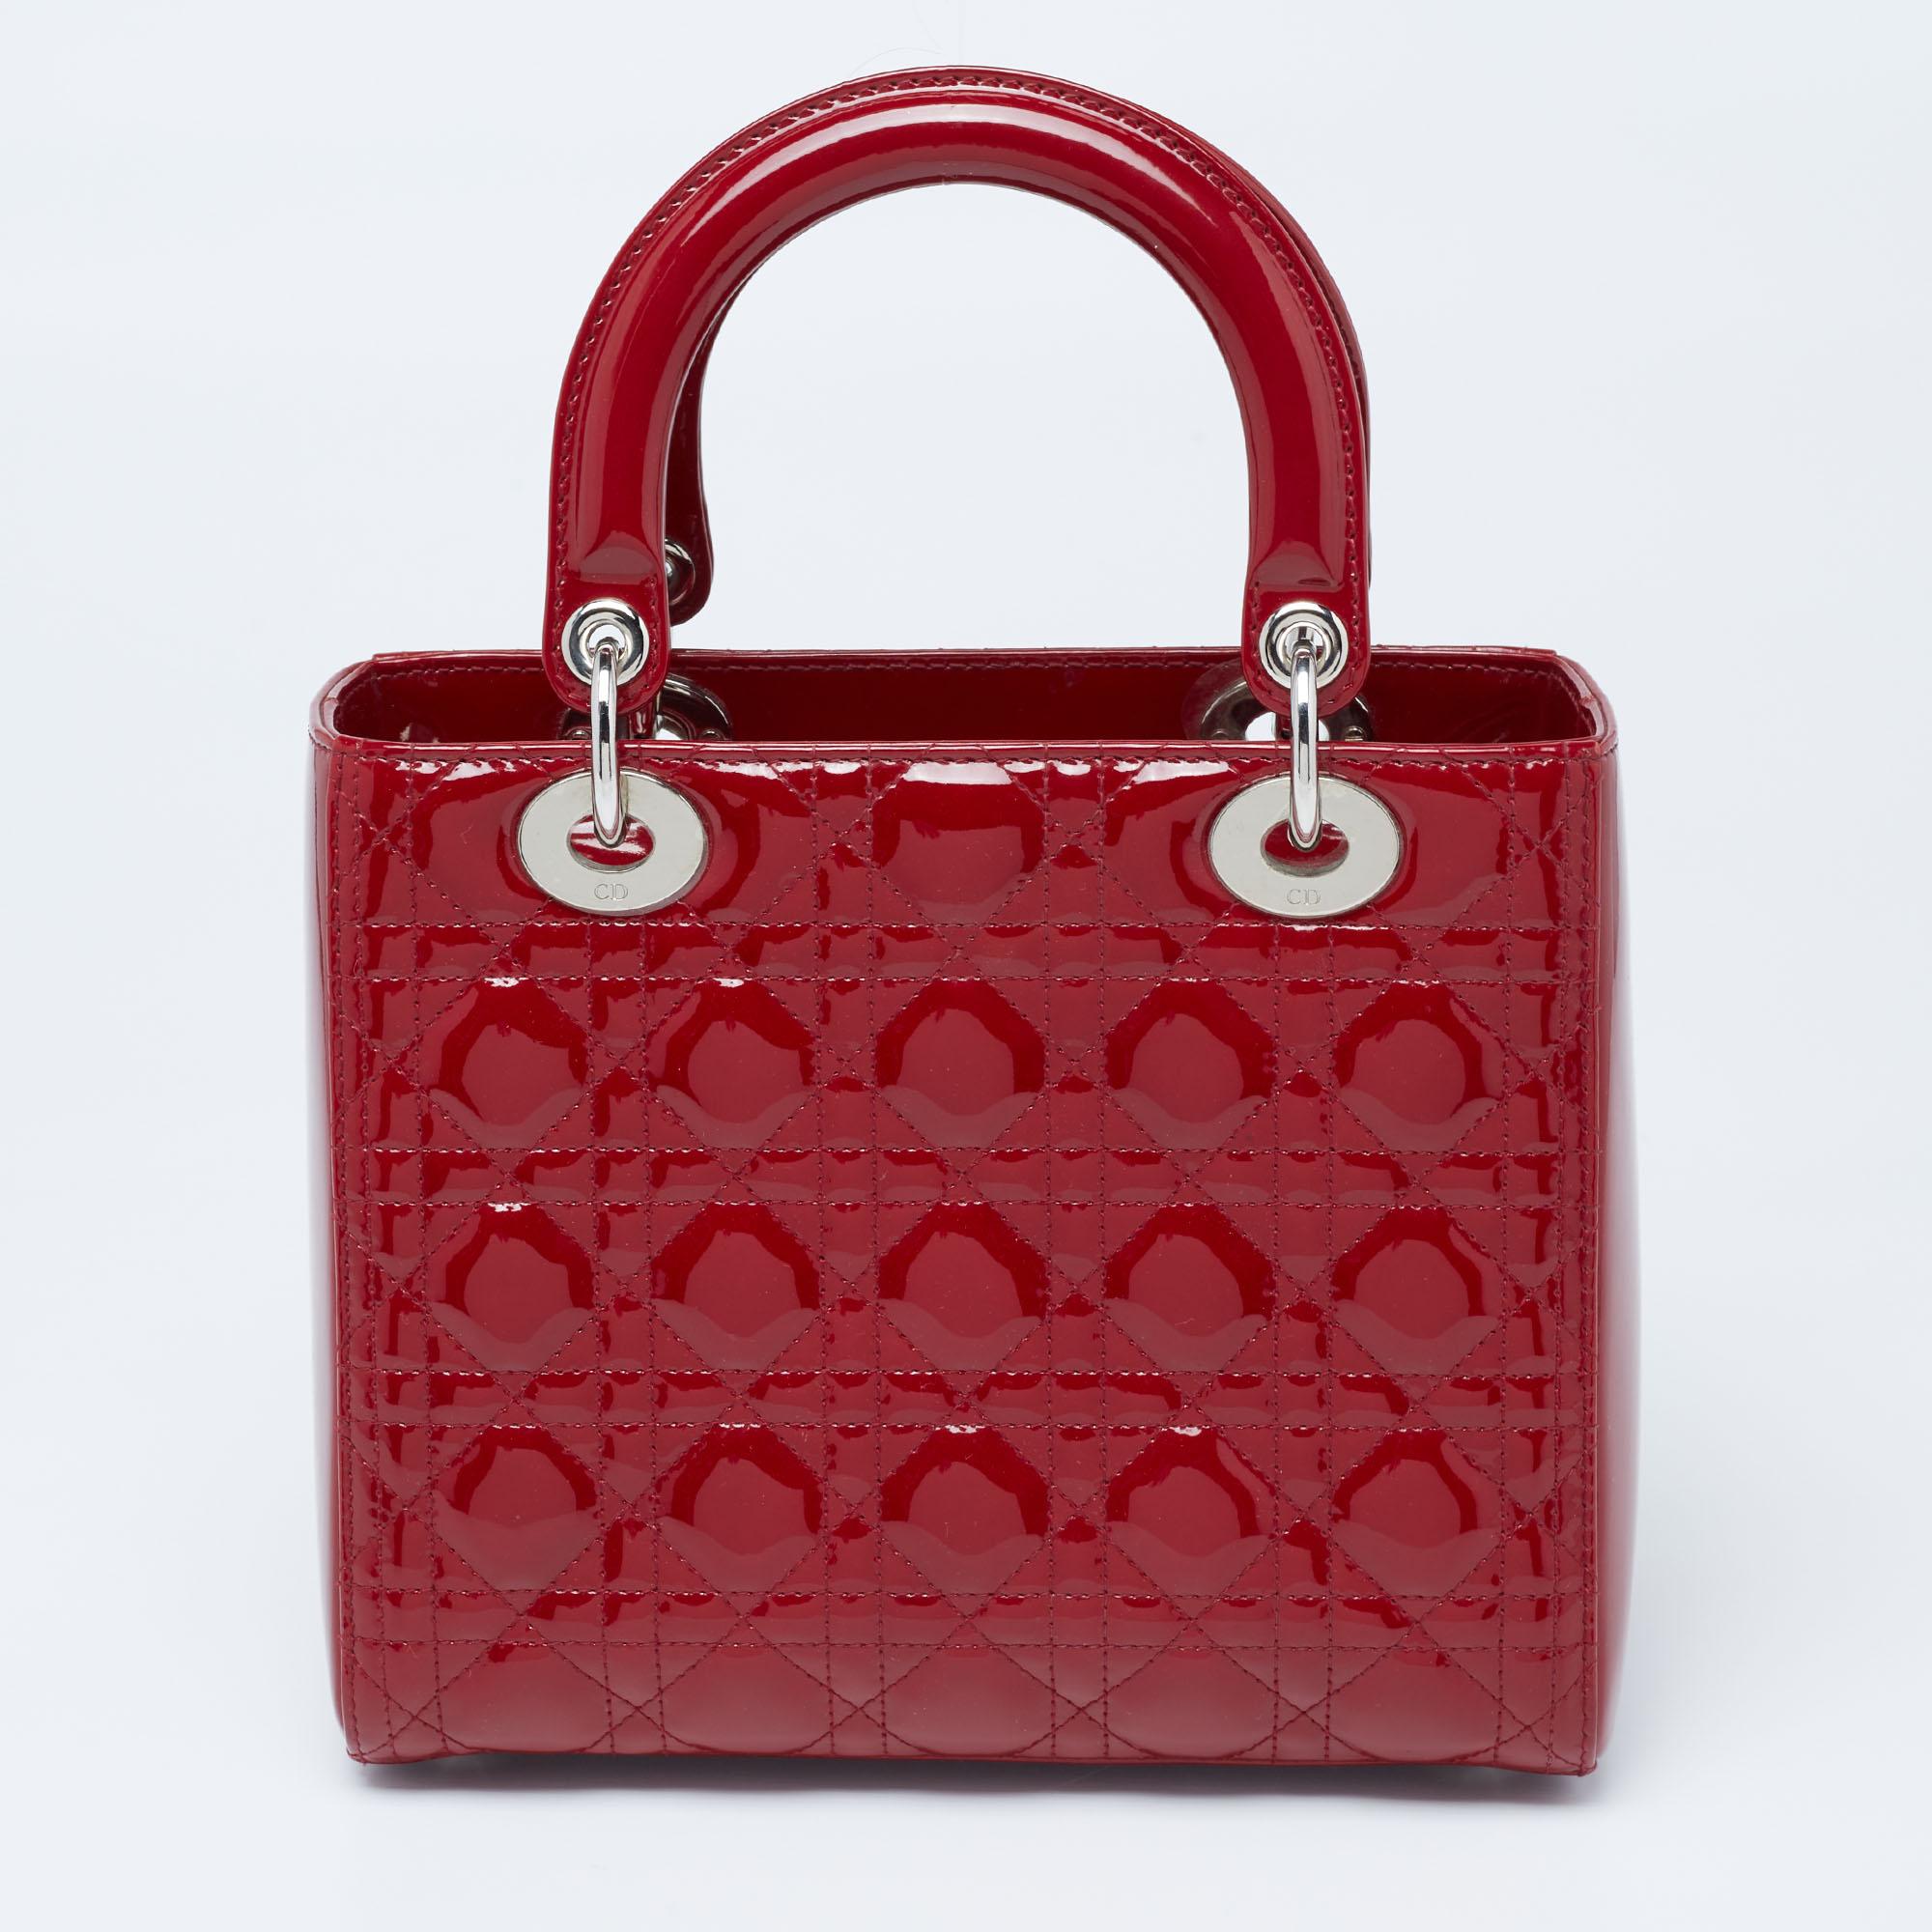 A timeless status and significant design define this impeccable Lady Dior tote. An iconic creation, this tote brings eternal poise, gracefulness, and elegance to your appearance. This version comes crafted in red Cannage patent leather, with